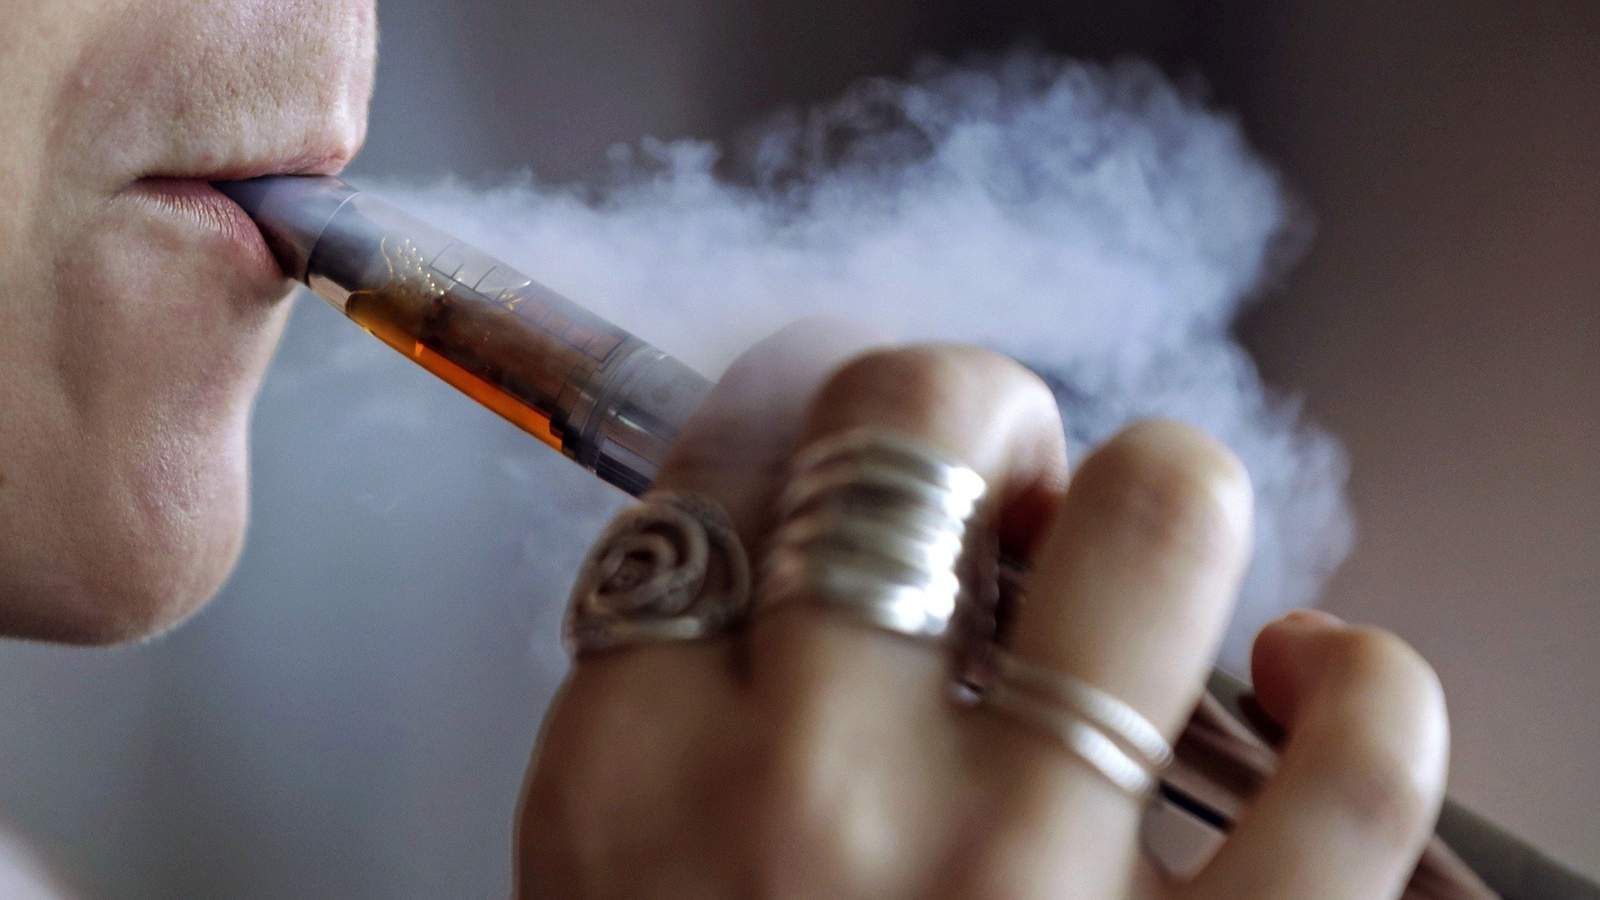 Michigan health officials confirm state’s 3rd death from vaping-related lung injury